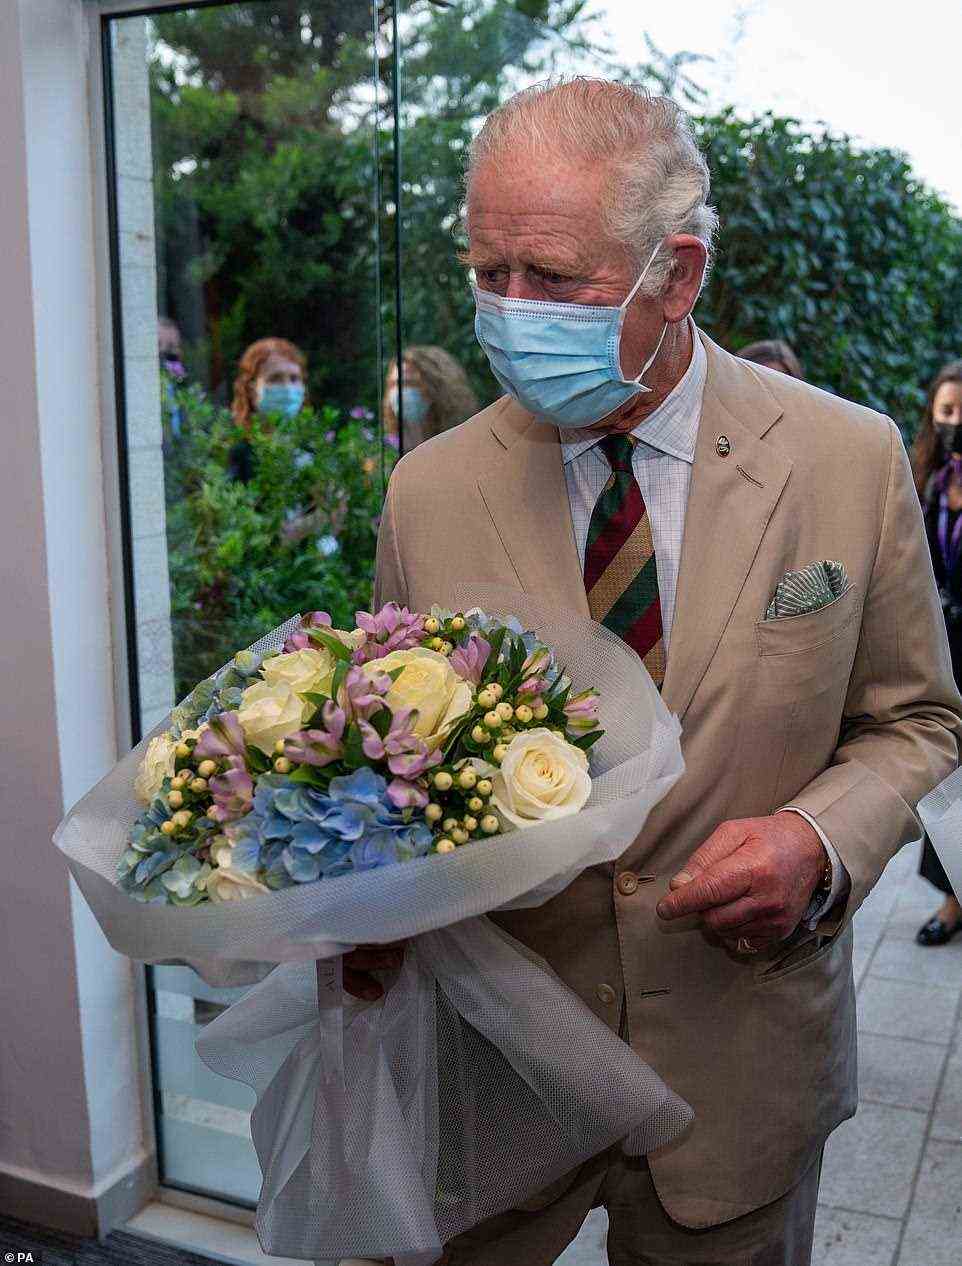 The Prince carries a floral bouquet as he arrives at the community centre in the capital; the project supports refugees starting a fresh life in Jordan after fleeing nearby countries